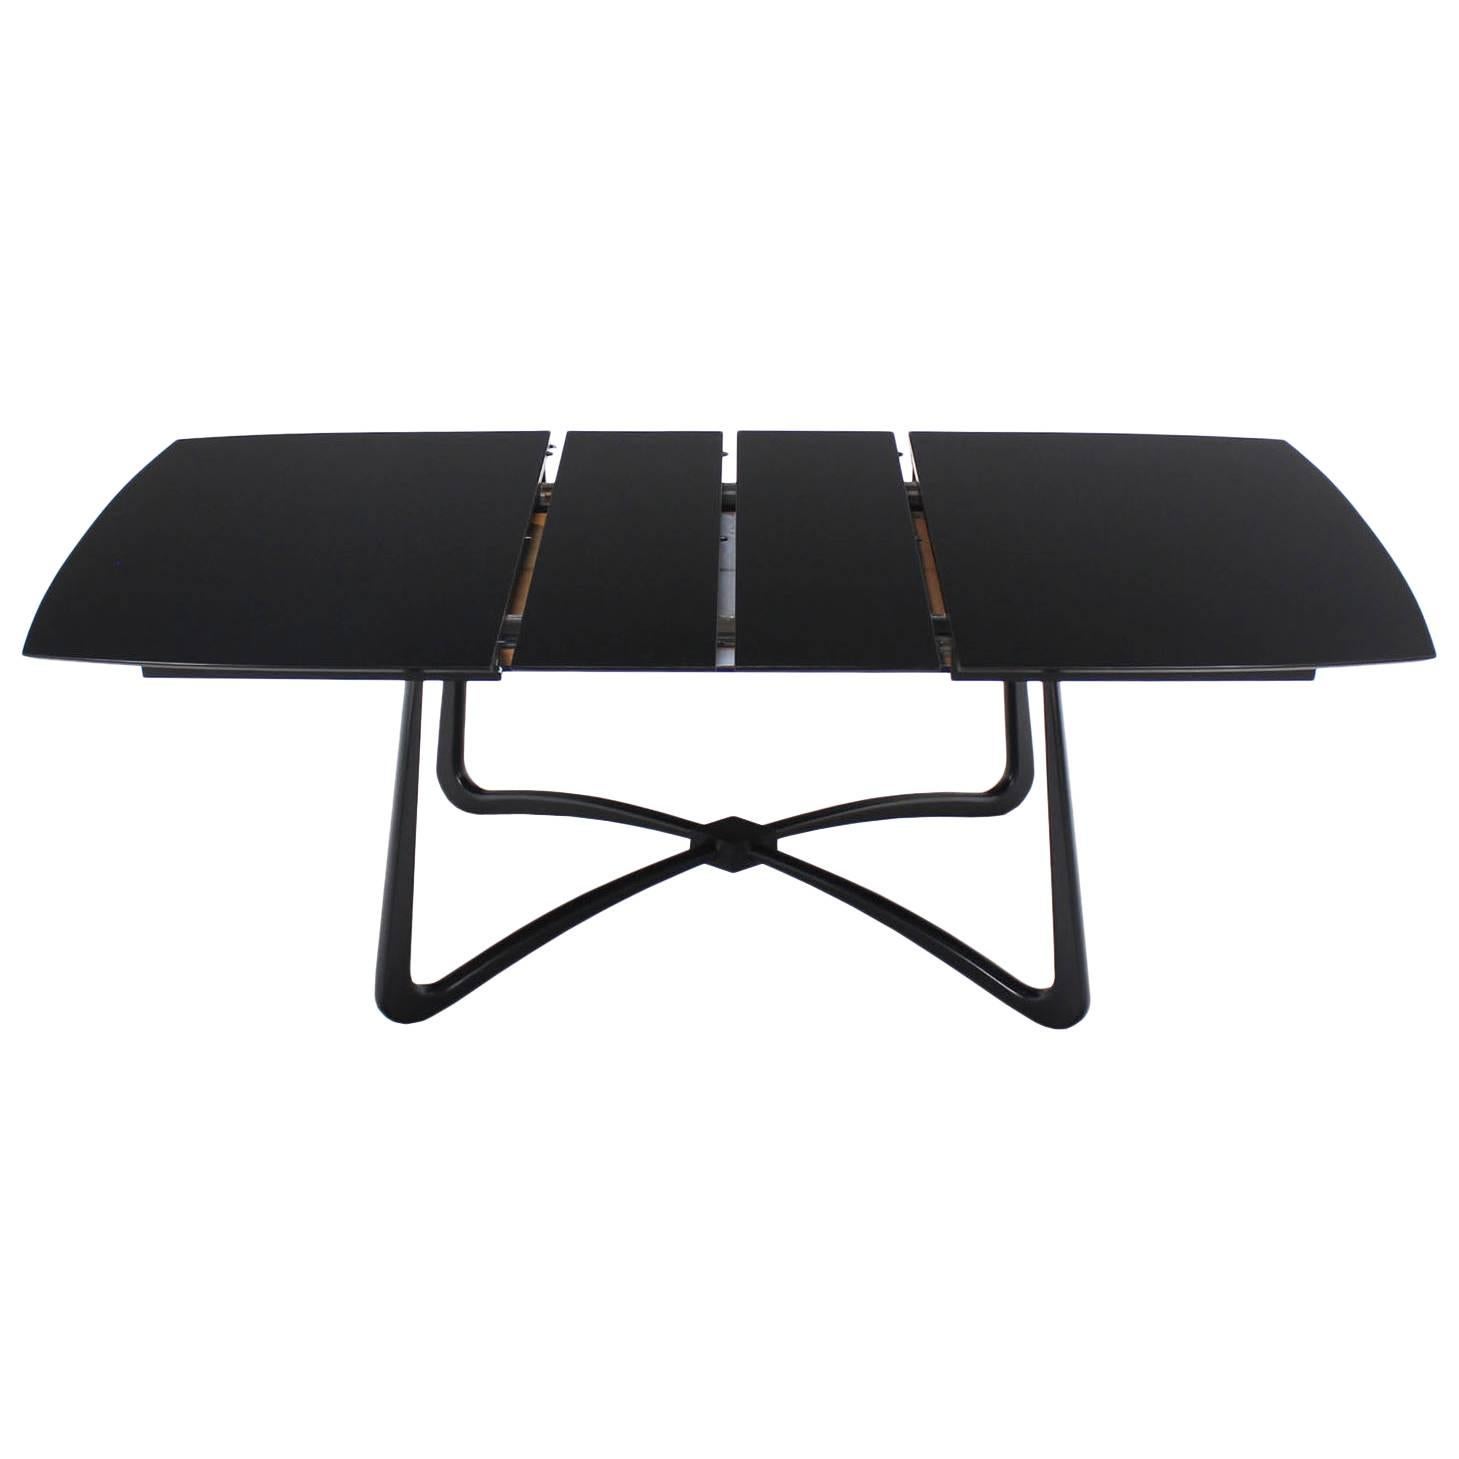 Black Lacquer Mid-Century Modern X-Base Dining Table with Two Leaves For Sale